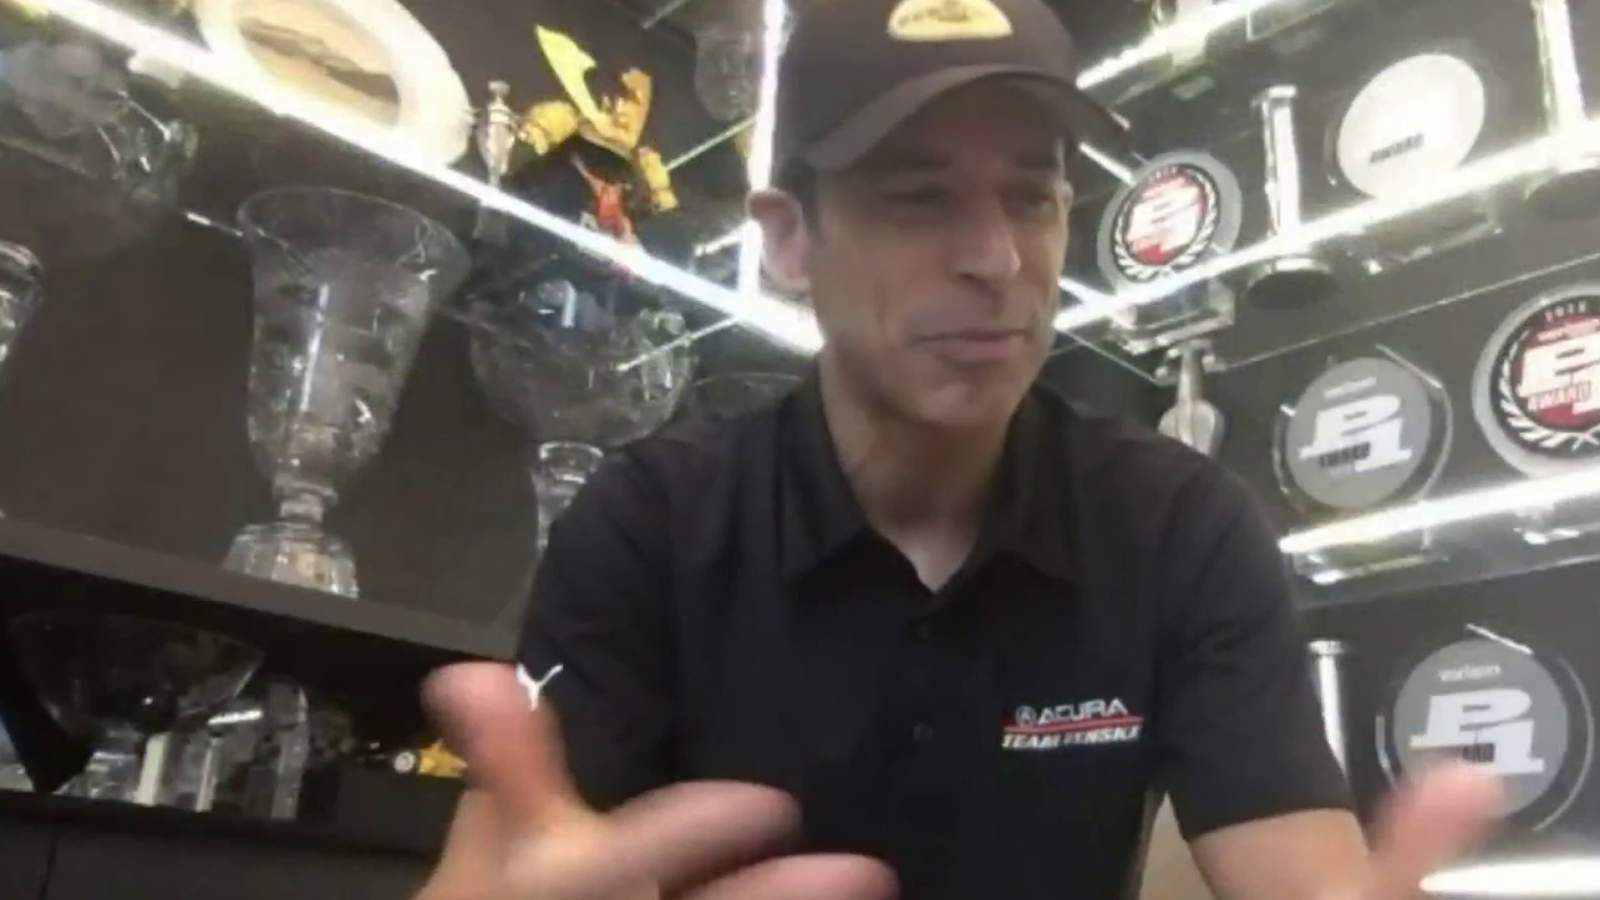 Benched: Helio Castroneves on missing Detroit Grand Prix, Dancing with the Stars win